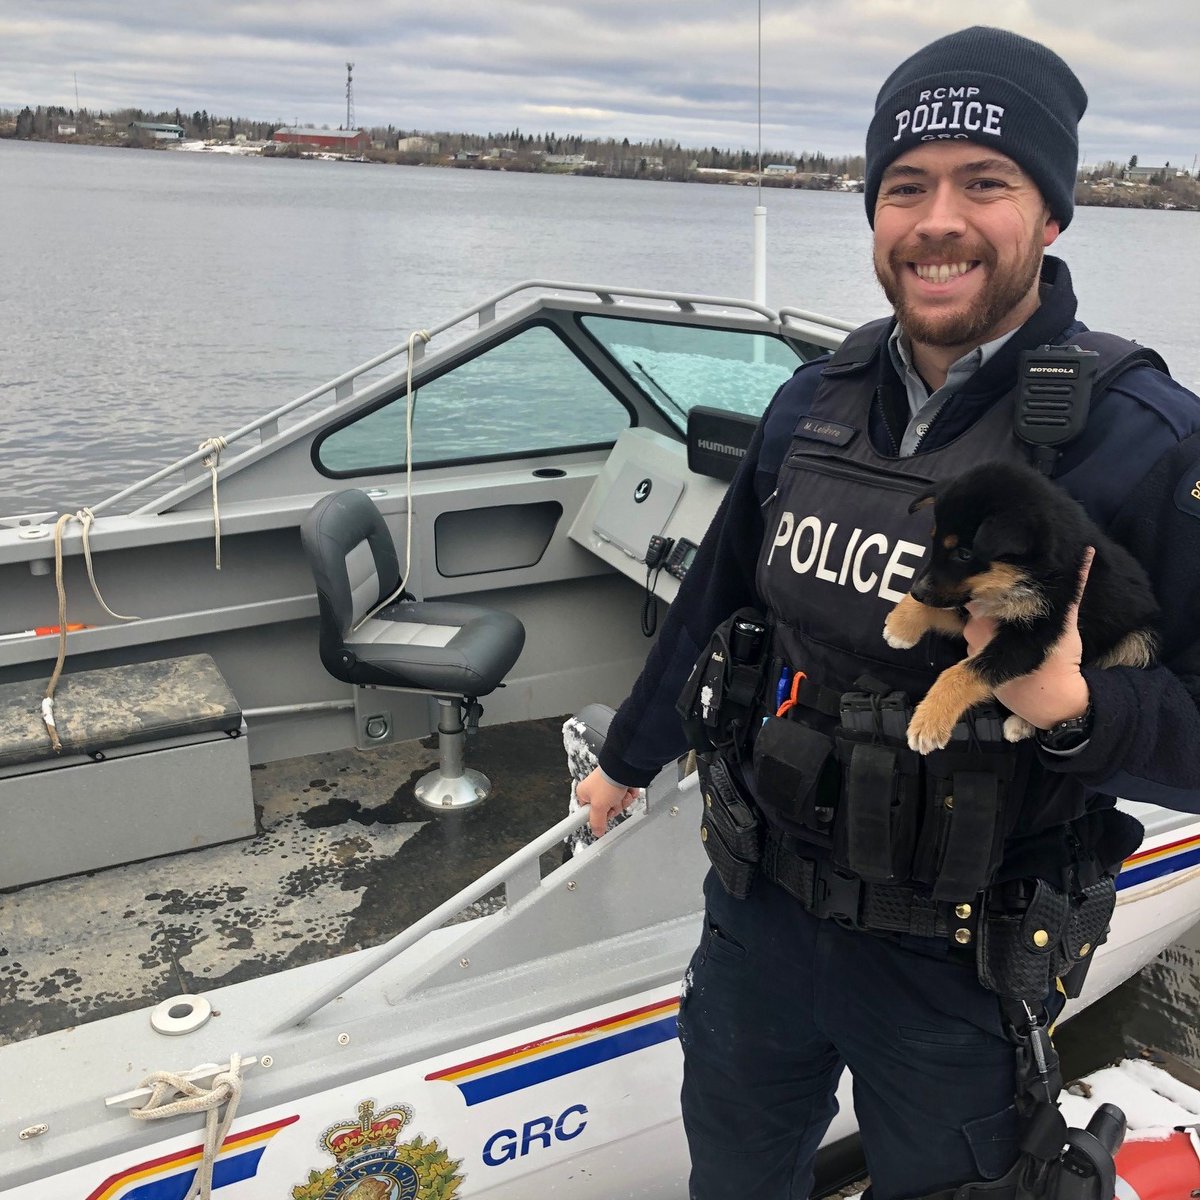 All in a day’s work in Island Lake! #ThisIsWhereWeWork #MBMonday #rcmpmb